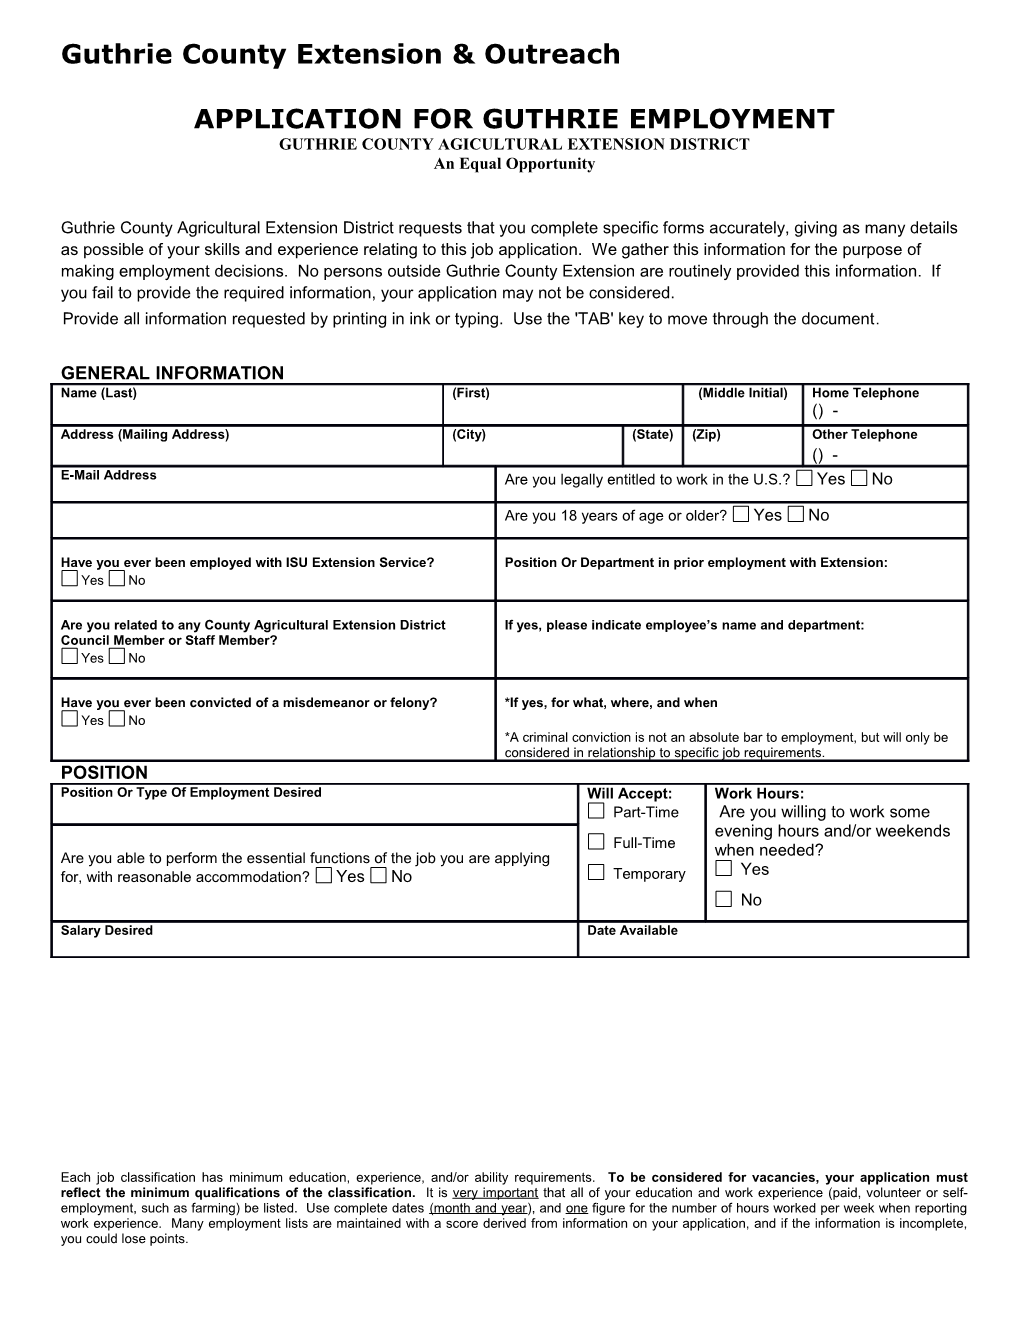 Application for Guthrie Employment